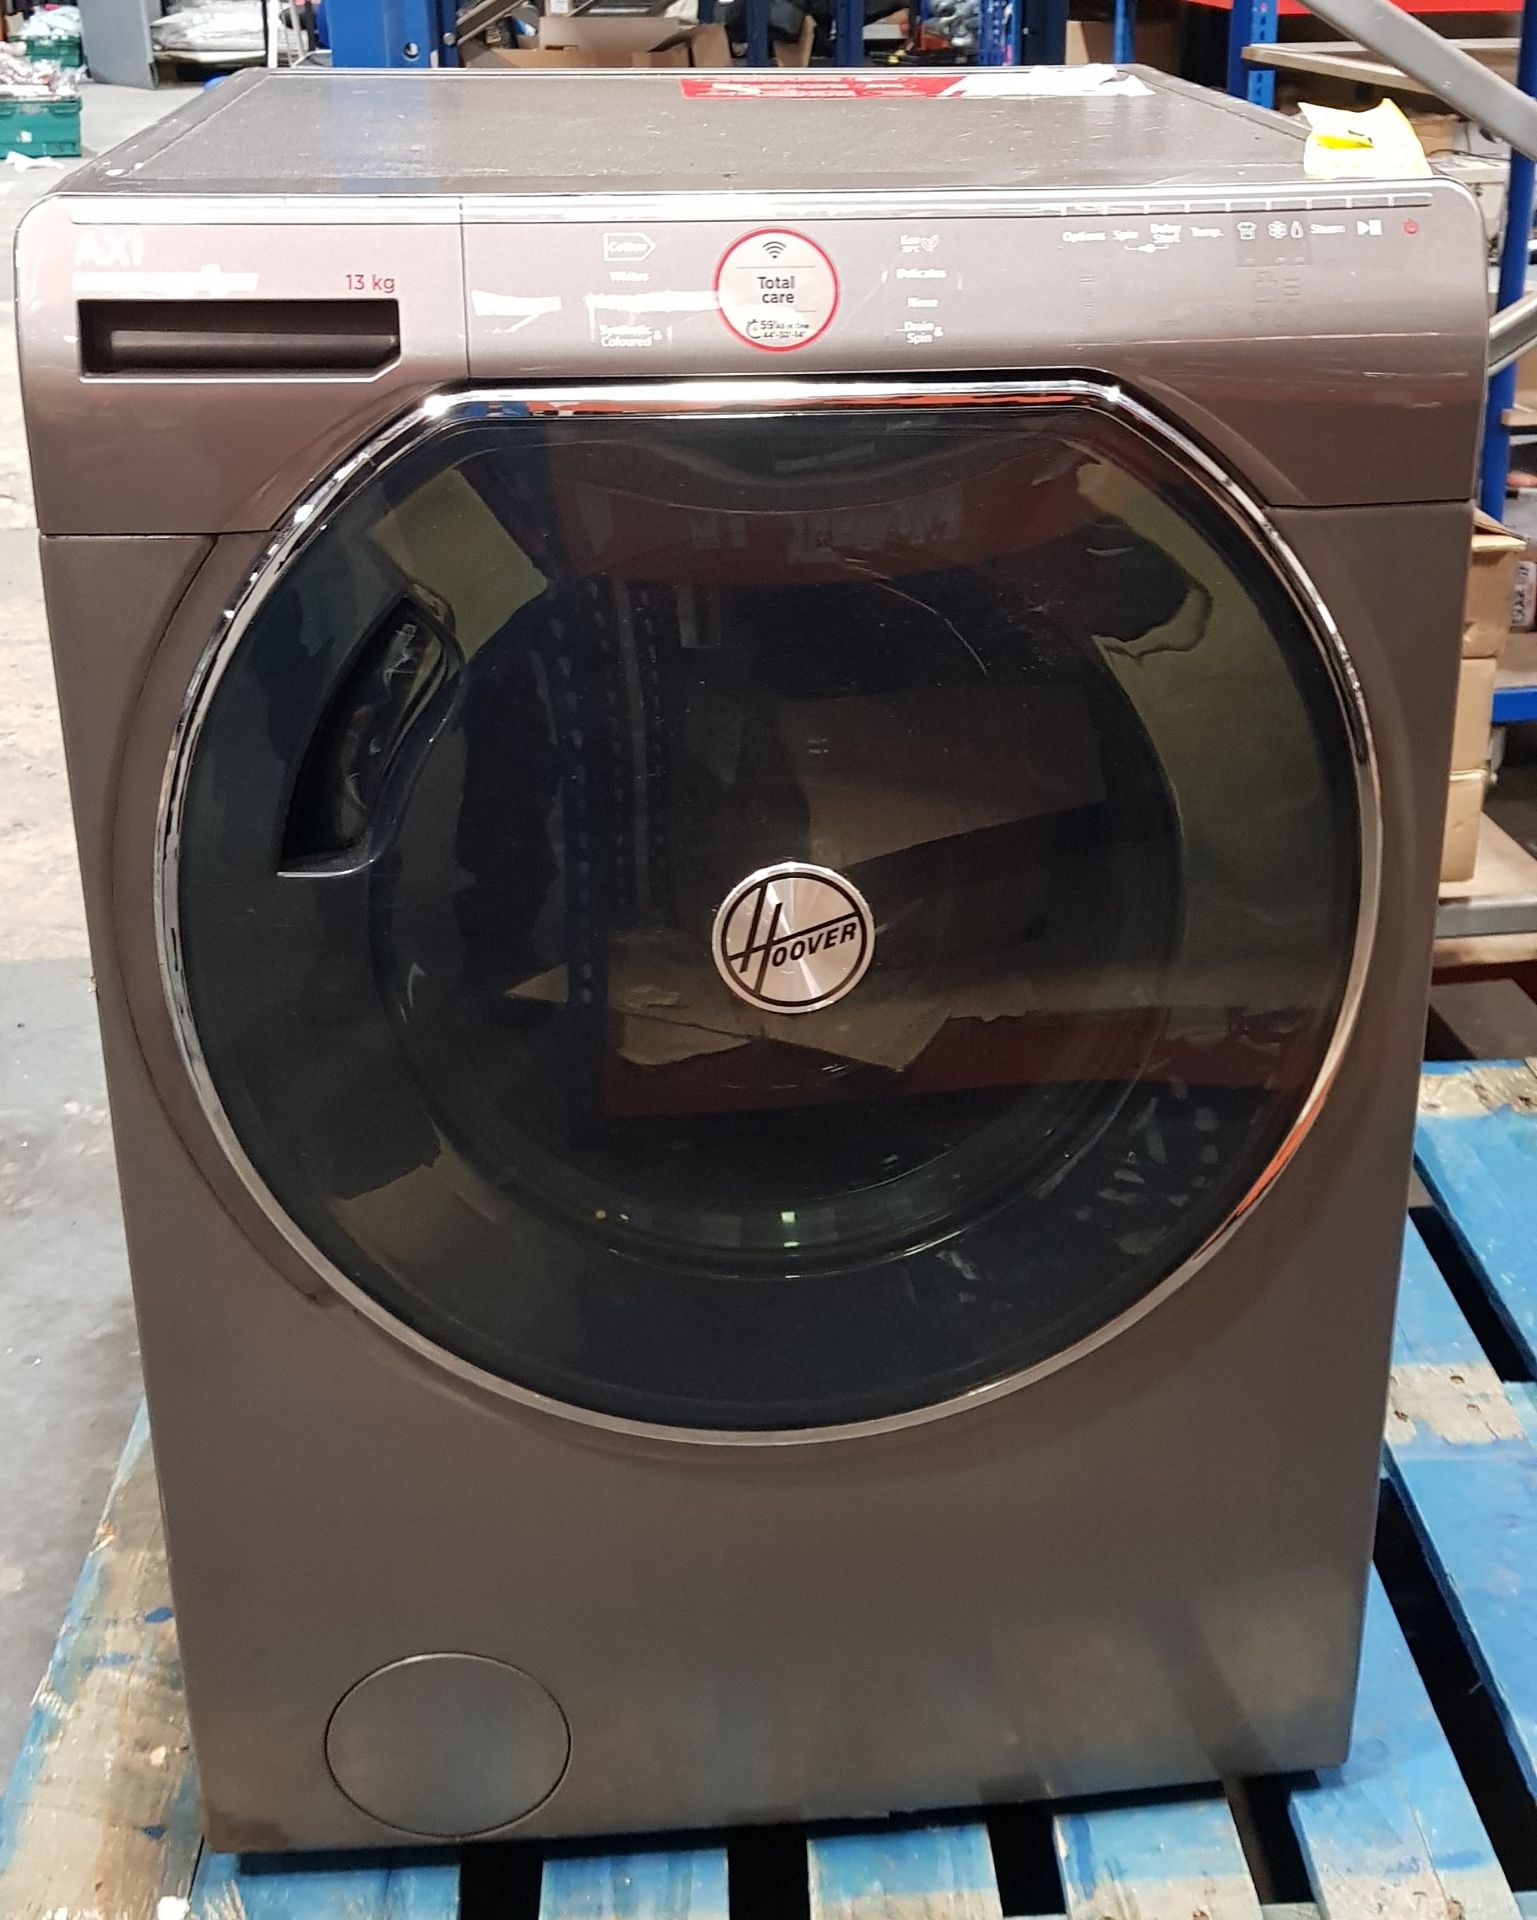 1 X HOOVER 13KG WASHING MACHINE - MODEL - AWMPD413LH7R-80 (NOTE: PREOWNED & UNTESTED)